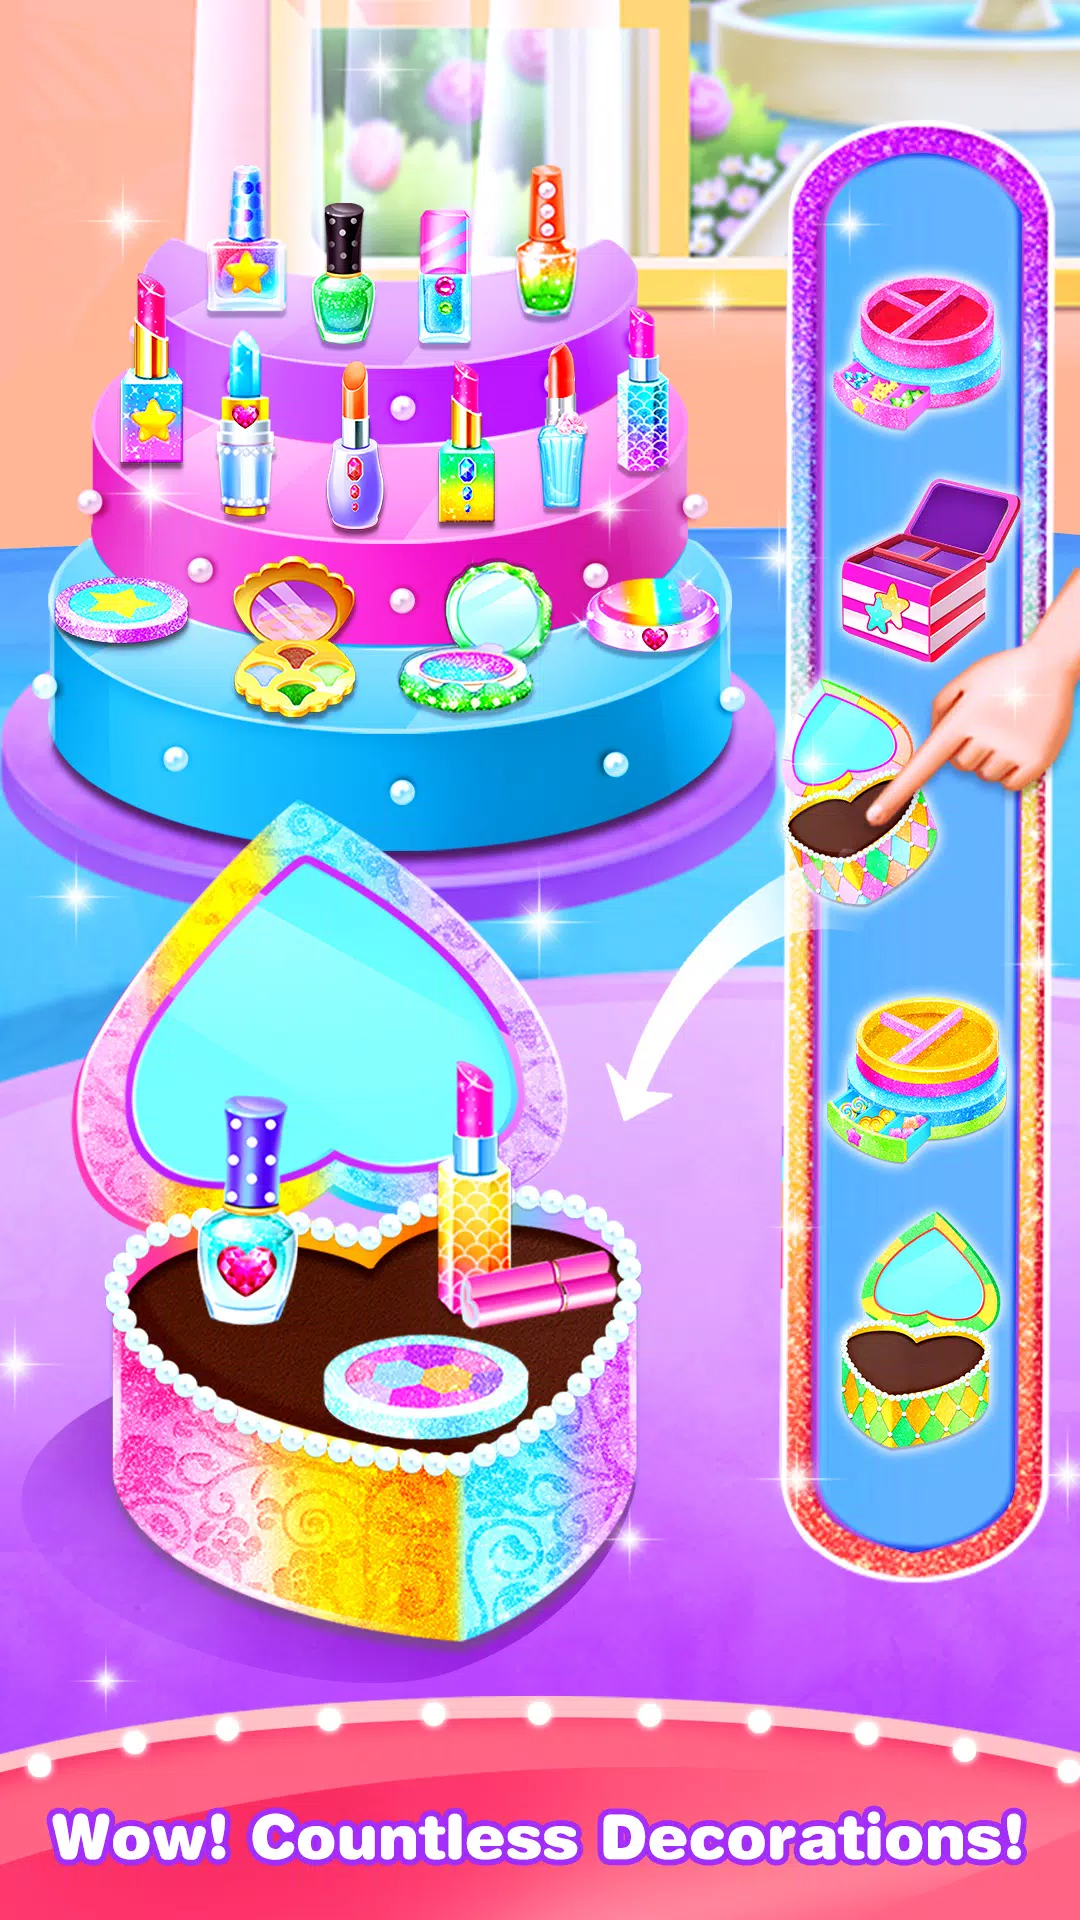 Play Girl Makeup Kit Comfy Cakes Pretty Box Bakery Game